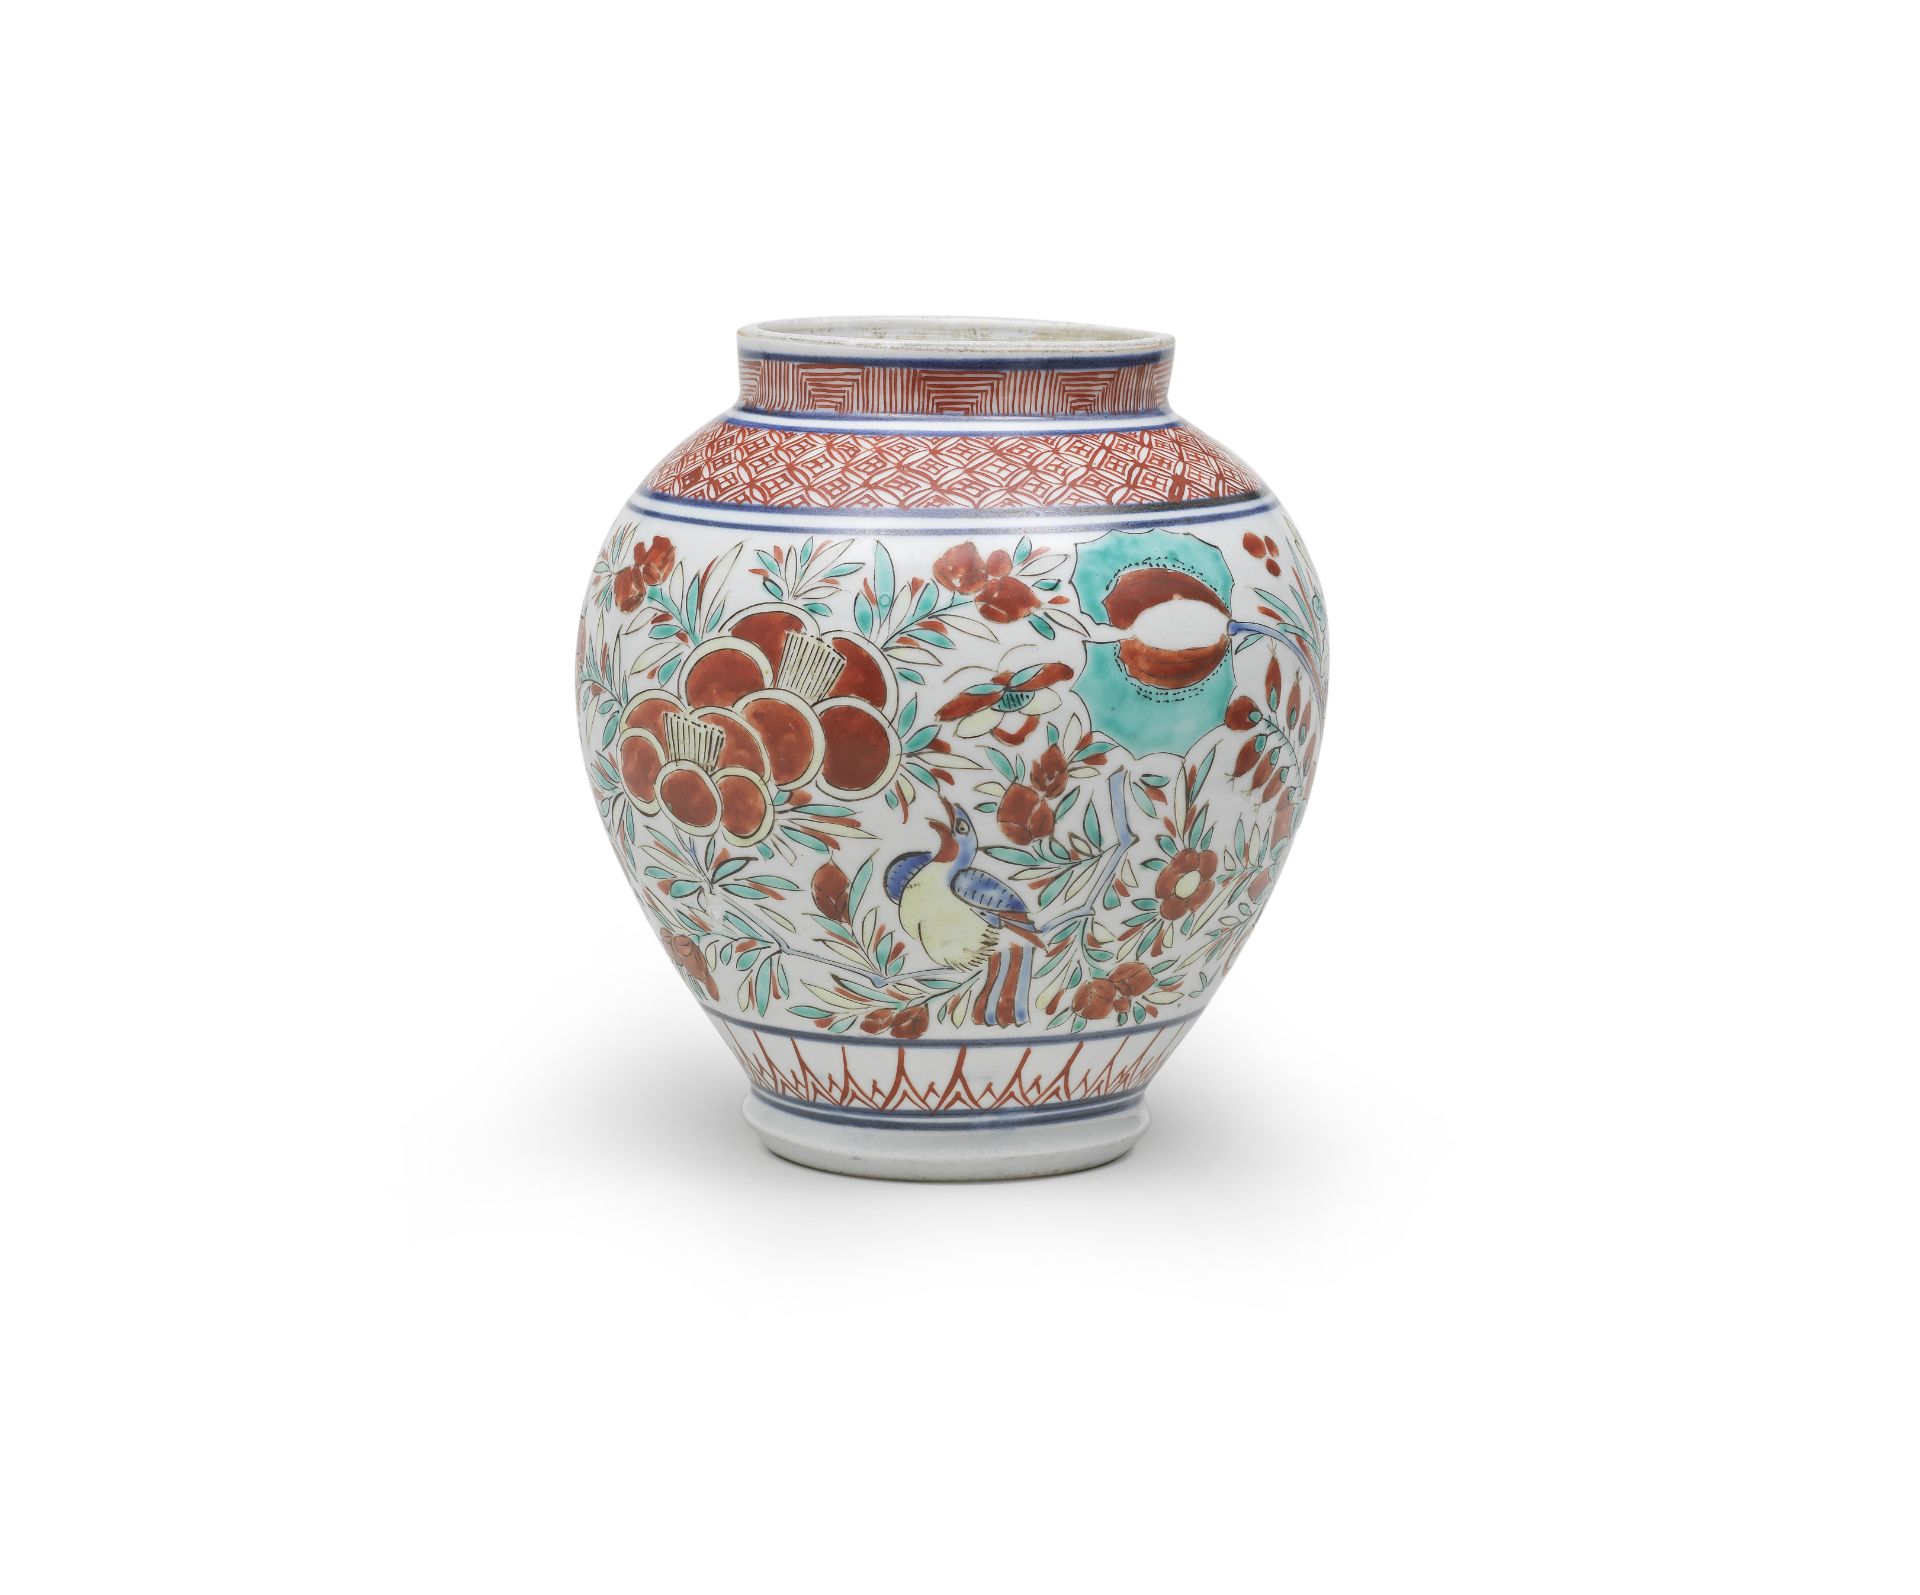 AN EARLY-ENAMELLED SMALL JAR Edo period (1615-1868), mid-/late 17th century (2)